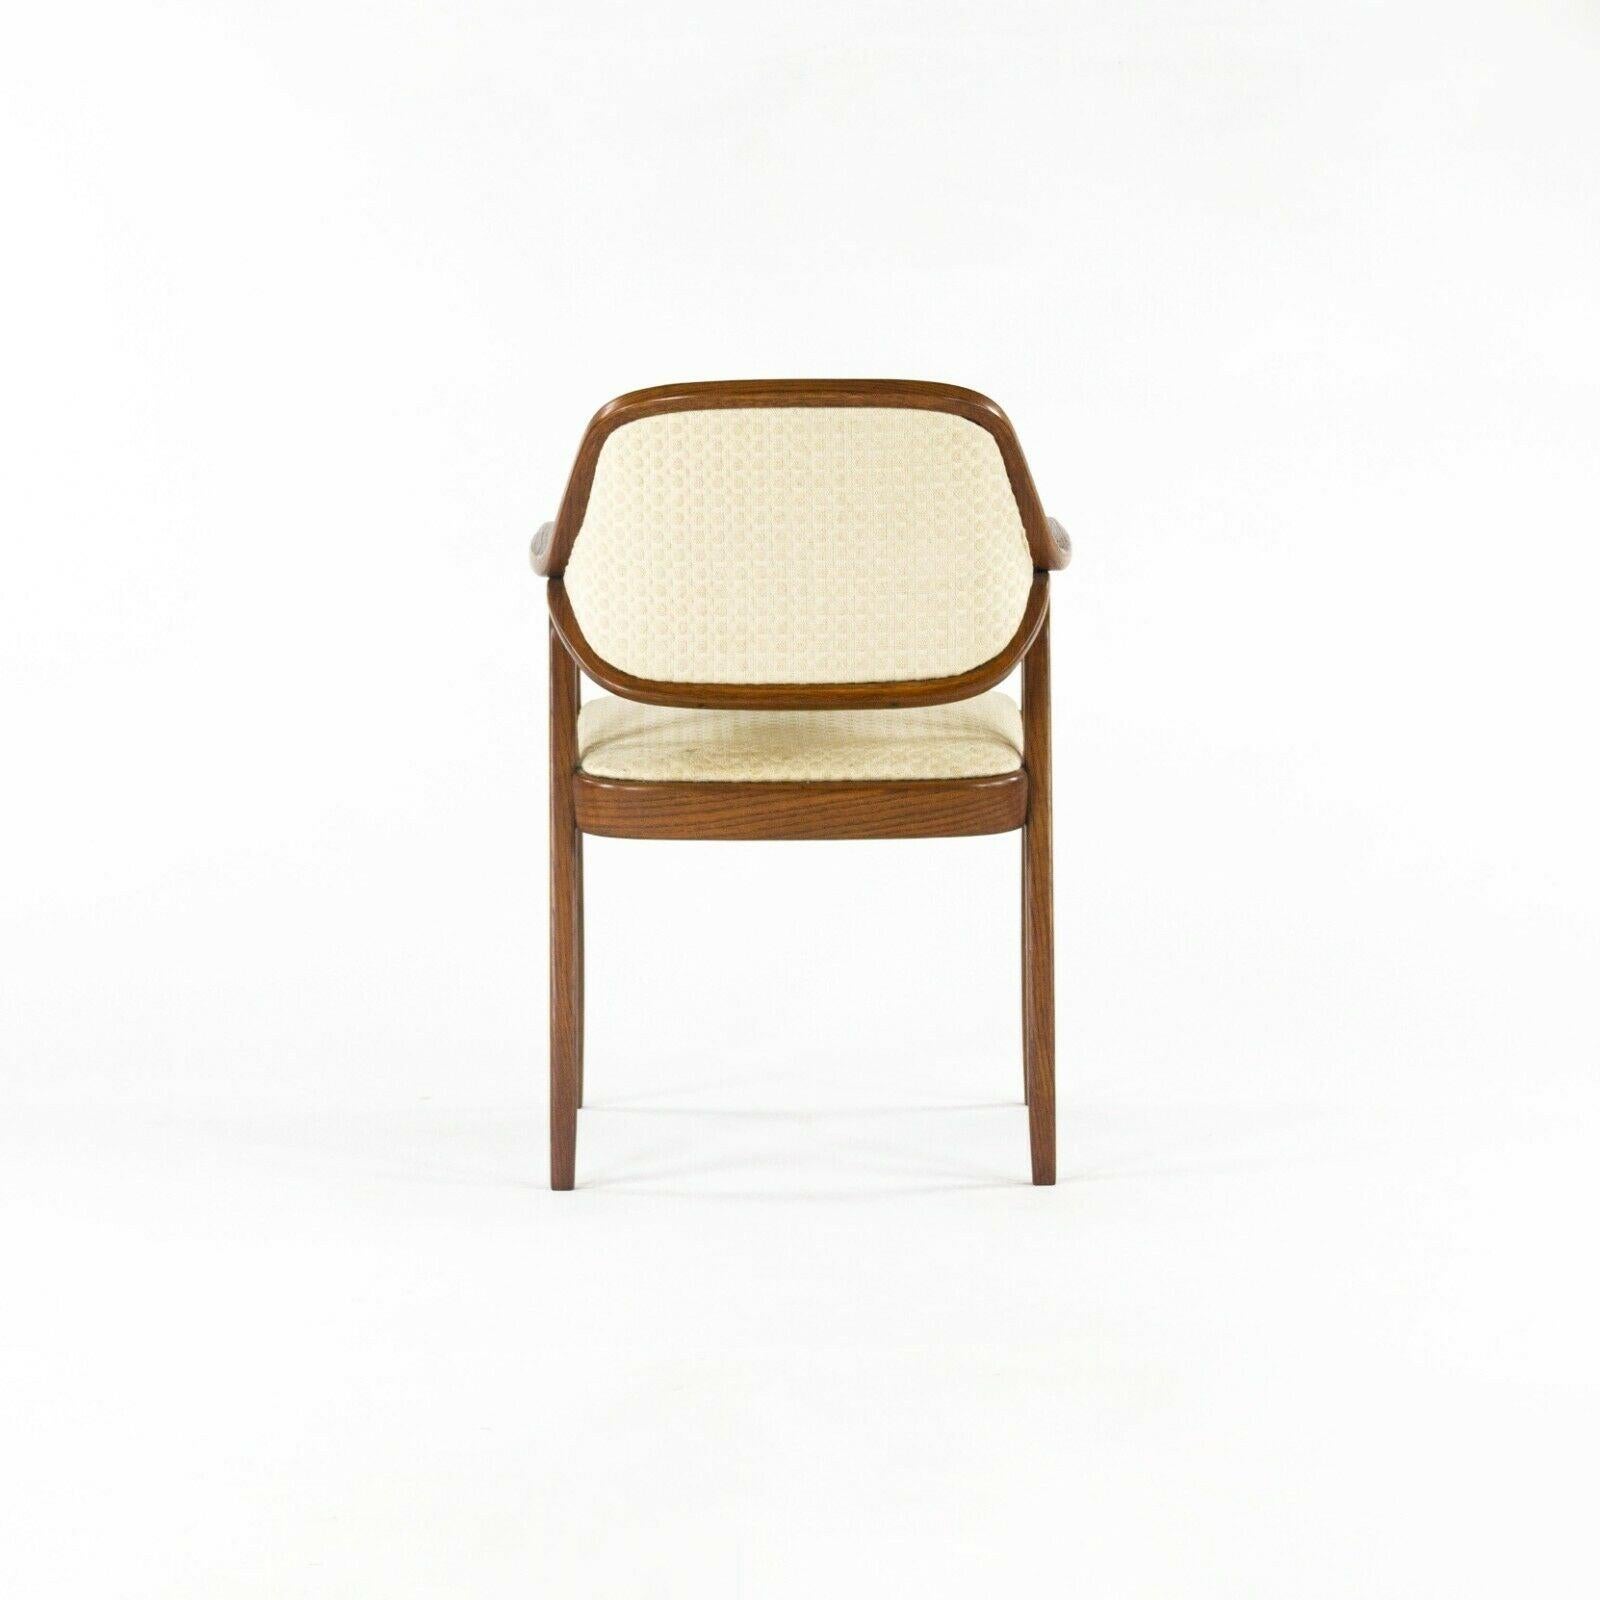 Late 20th Century 1980s Pair of Don Petitt for Knoll 1105 Bentwood Armchair in Oak with Tan Fabric For Sale